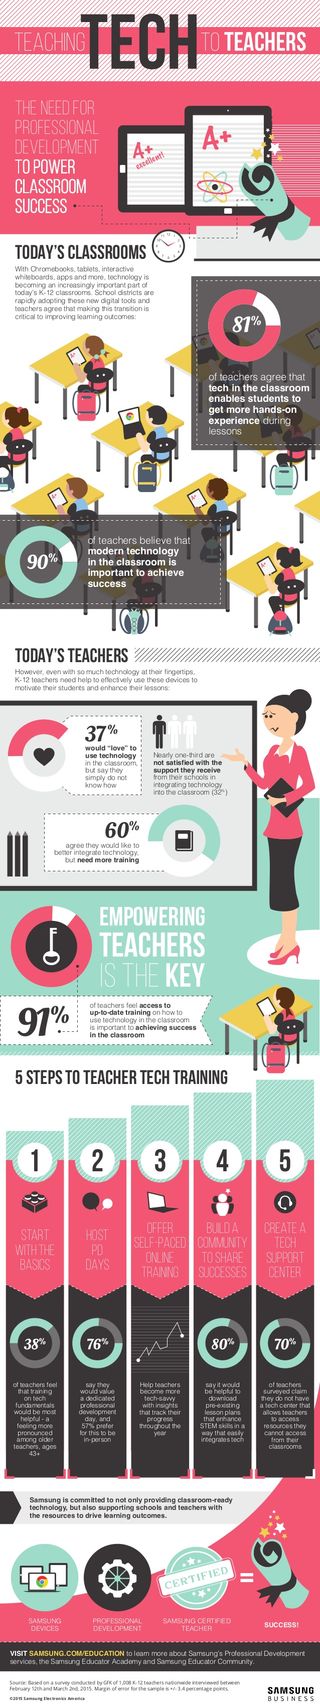 Infographic: Most Teachers Don't Feel Prepared to Use Technology in Classrooms